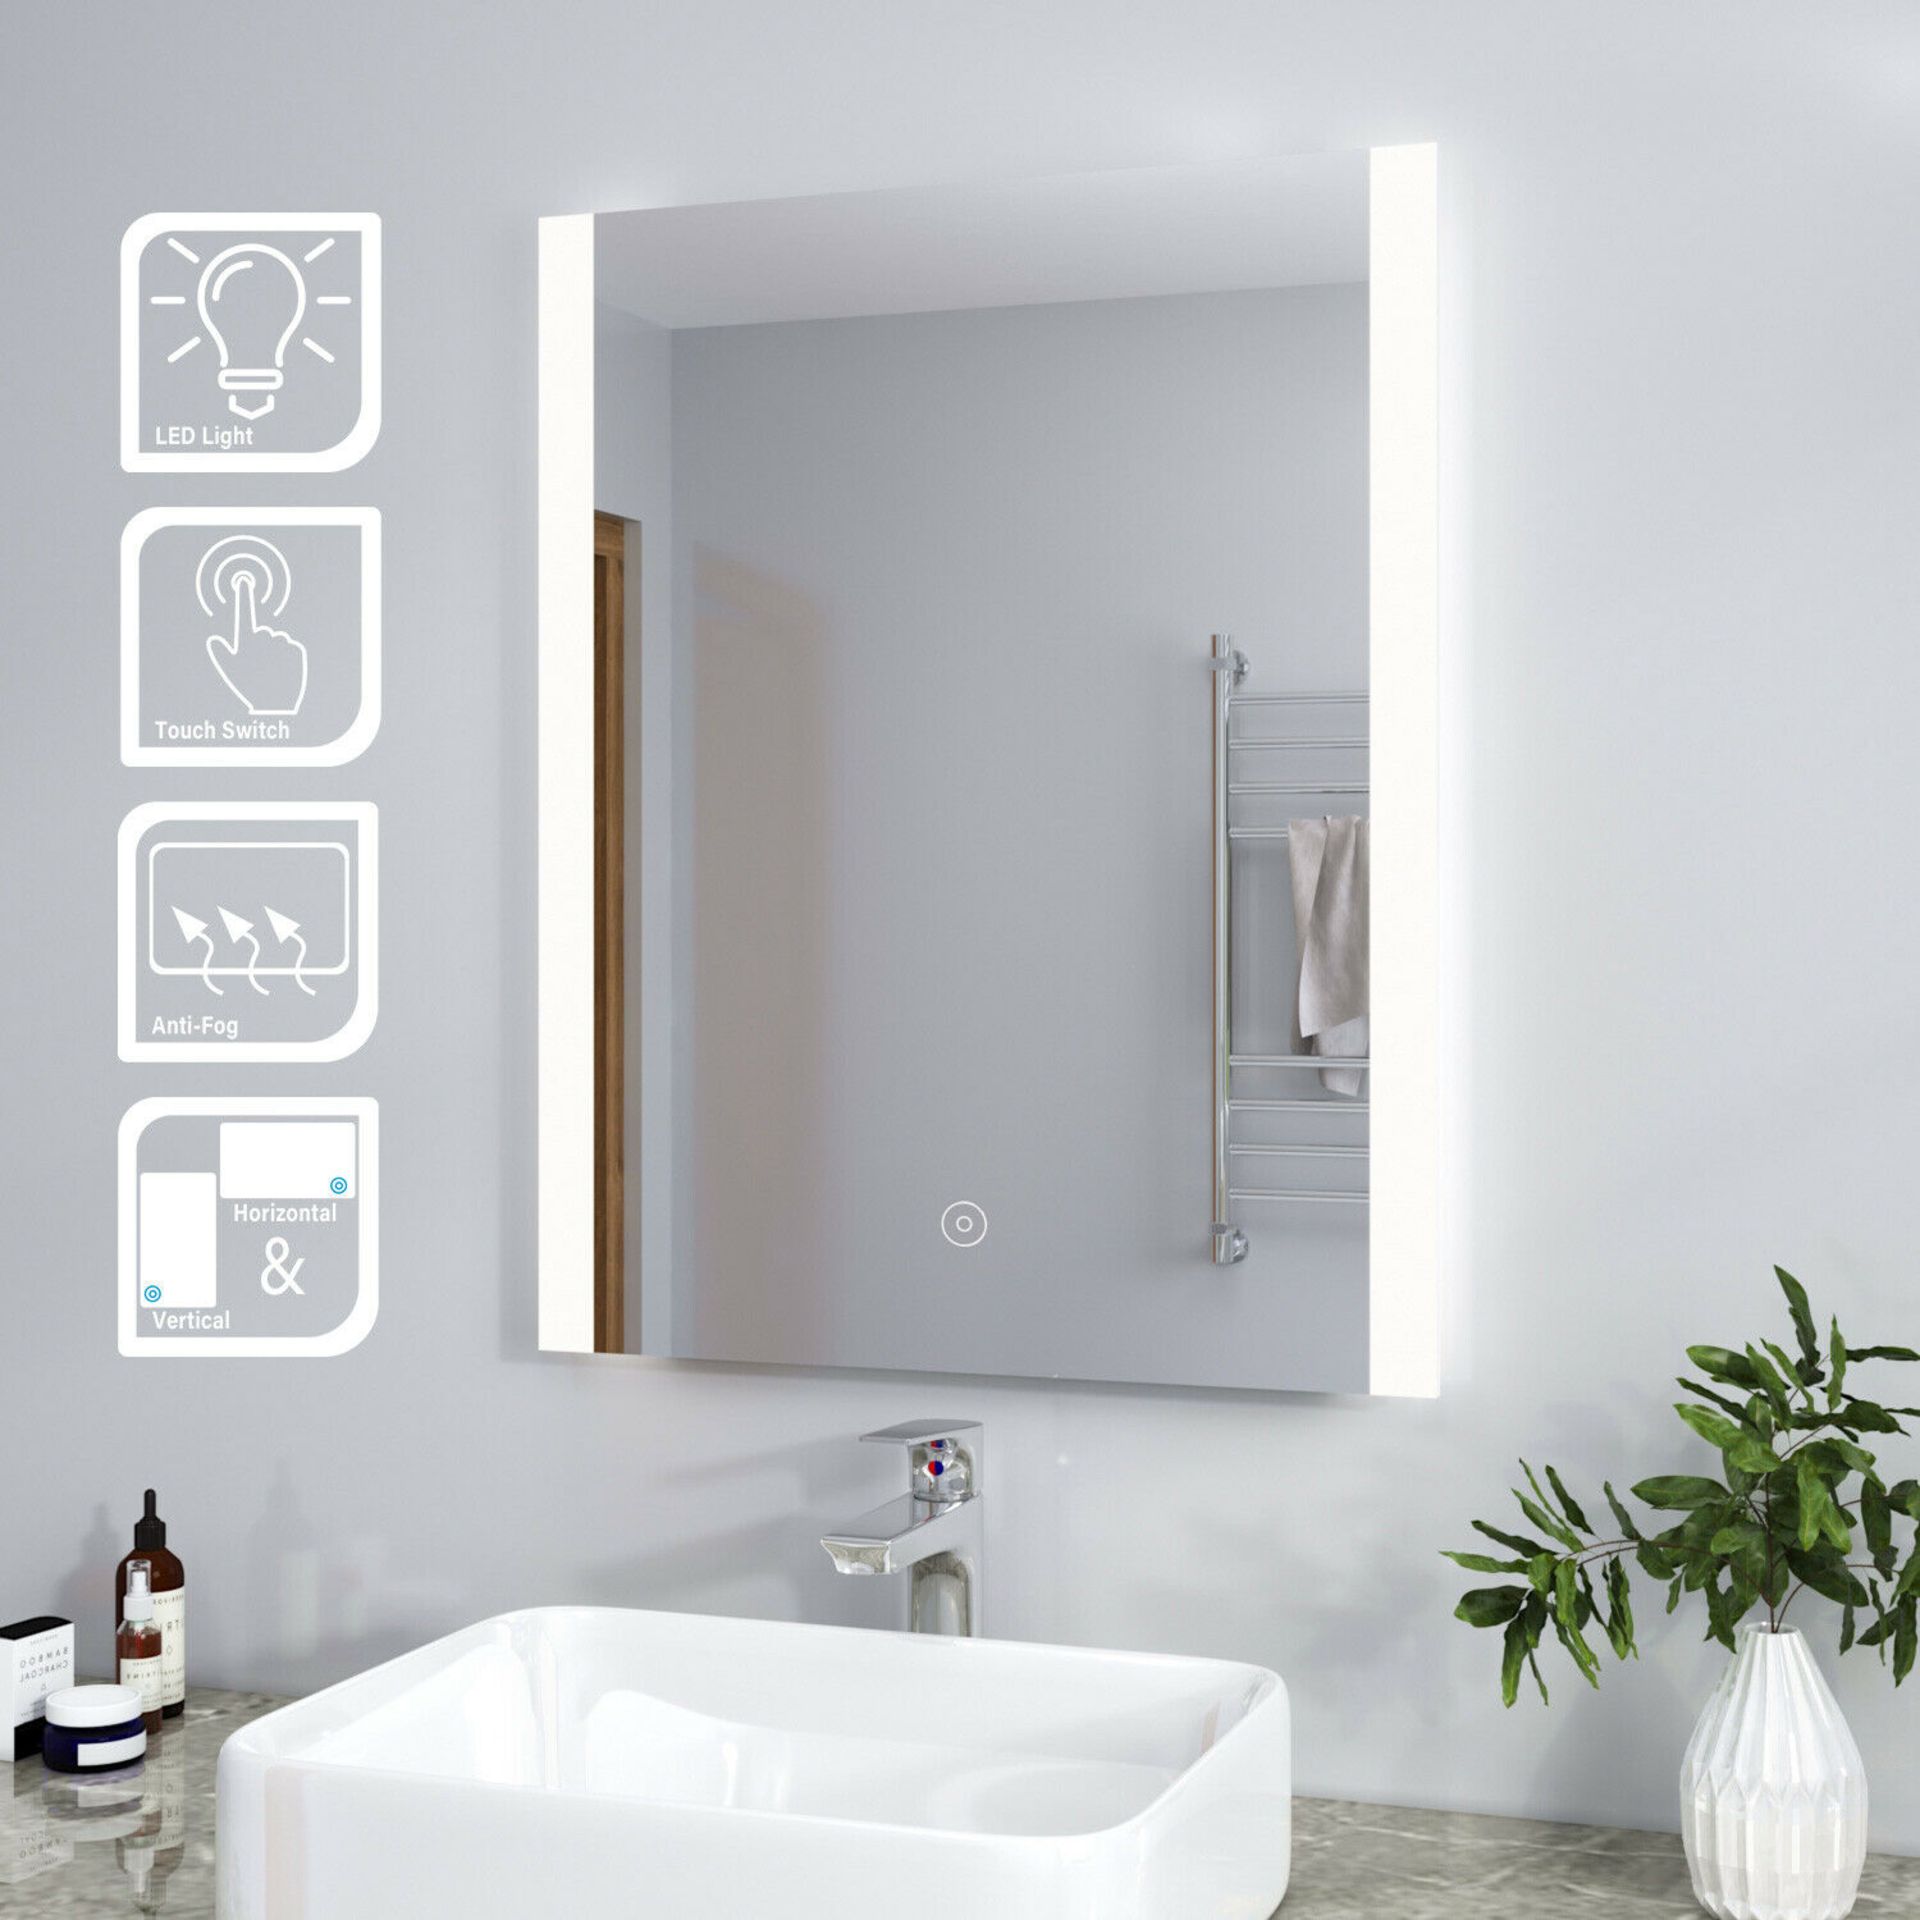 (KN82) 600x800mm Cosmic LED Illuminated Bathroom Mirror. We love this mirror as it provides a w...